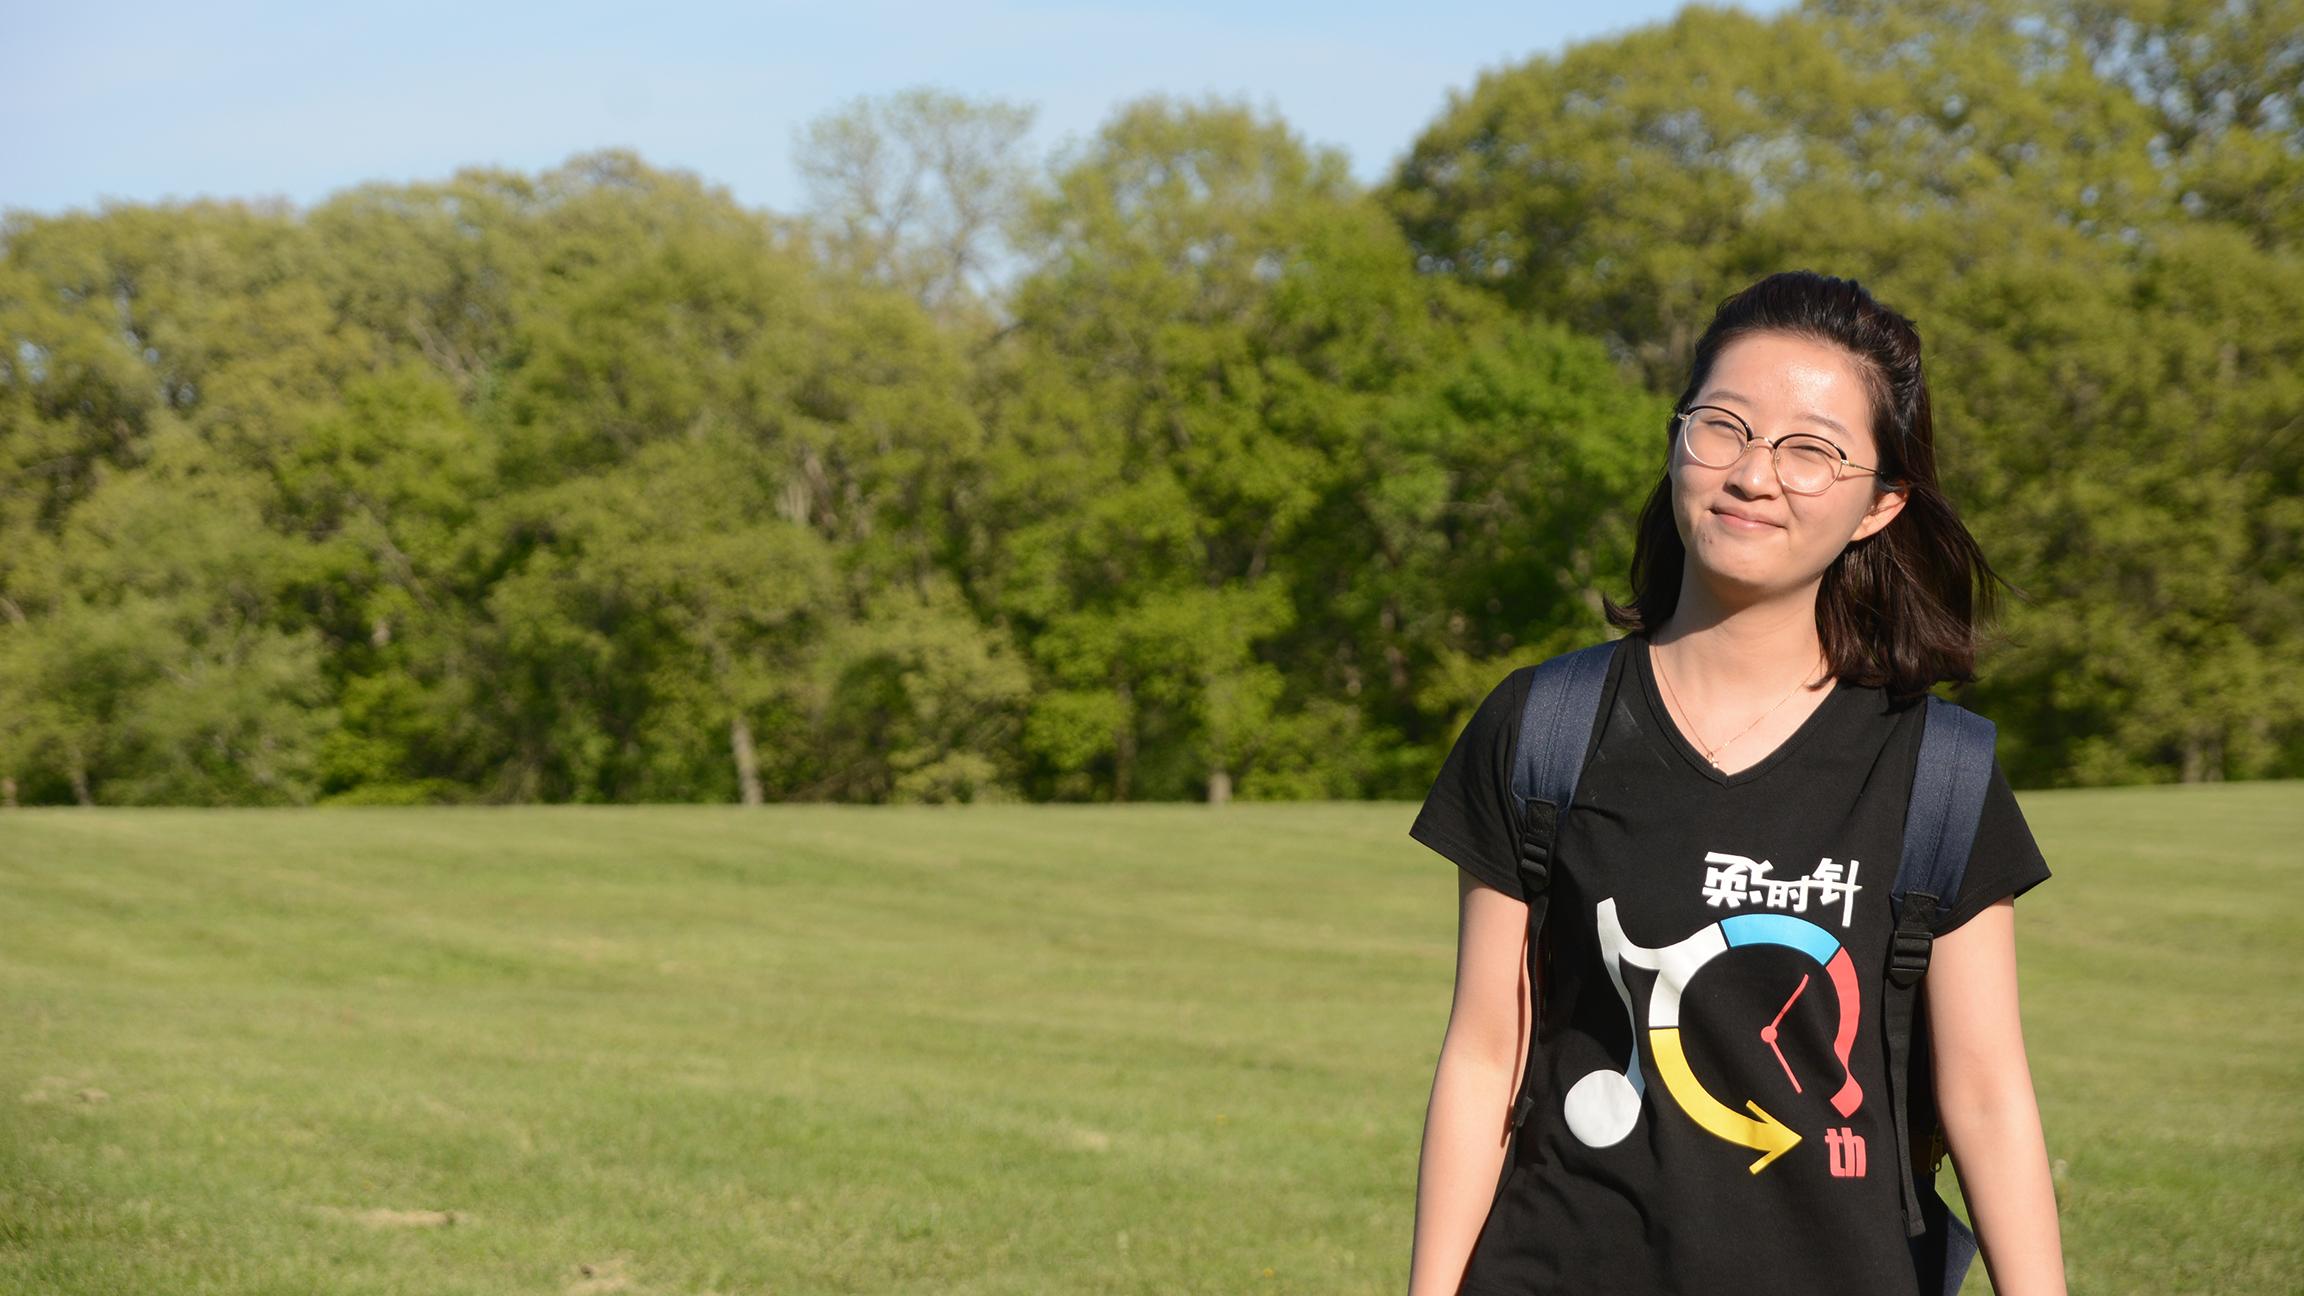 Yingying Zhang disappeared on June 9. (University of Illinois Police Department)